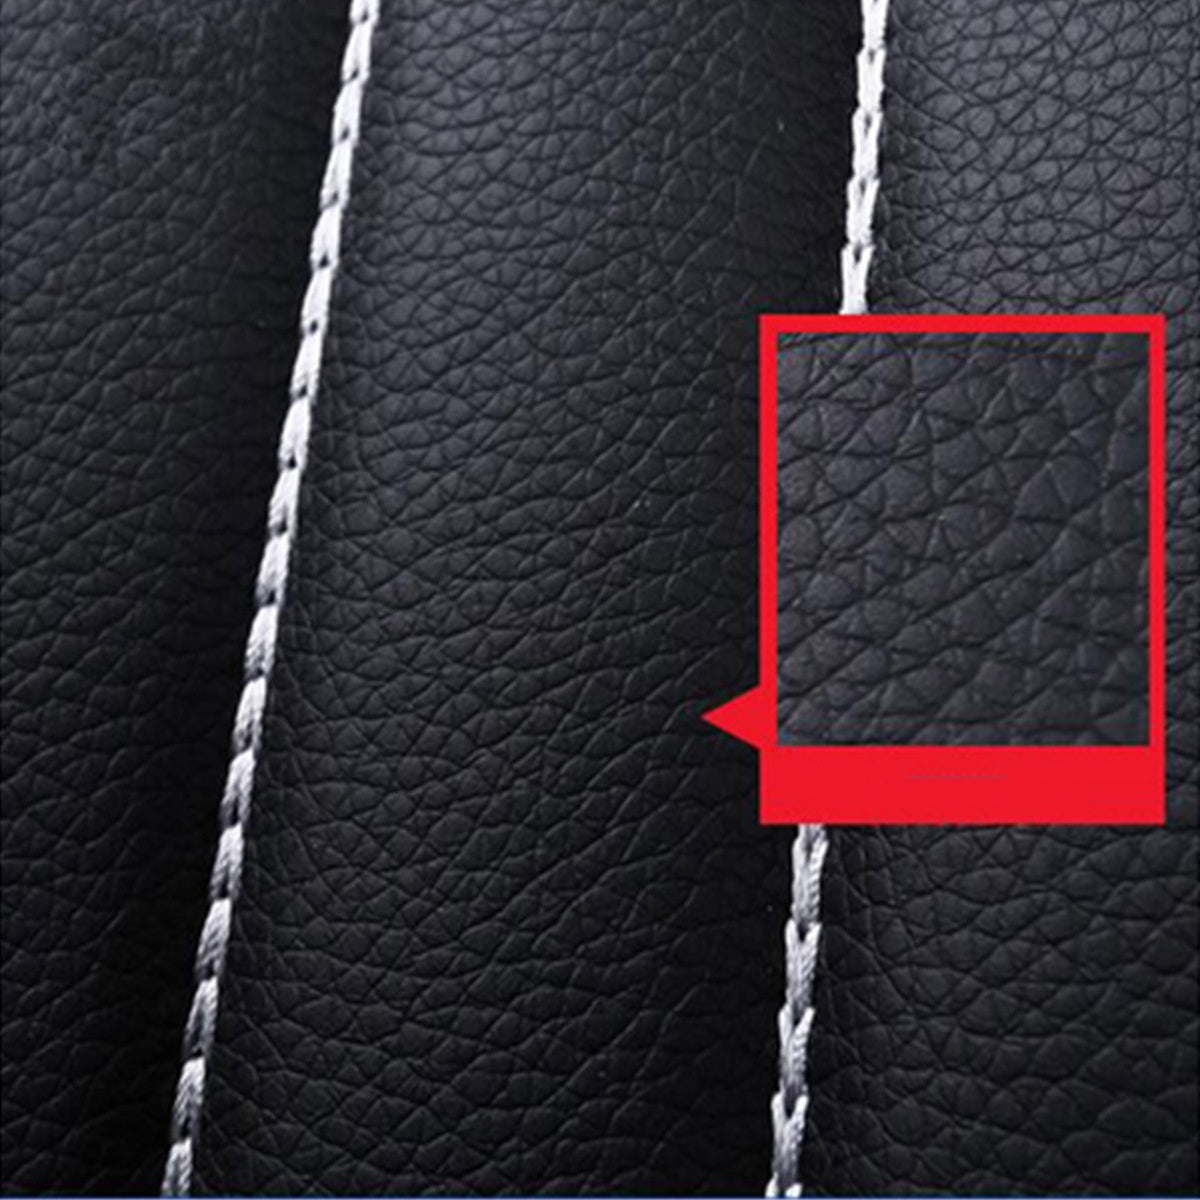 Full Coverage High Quality PU Leather 2 PCs Car Seat Covers